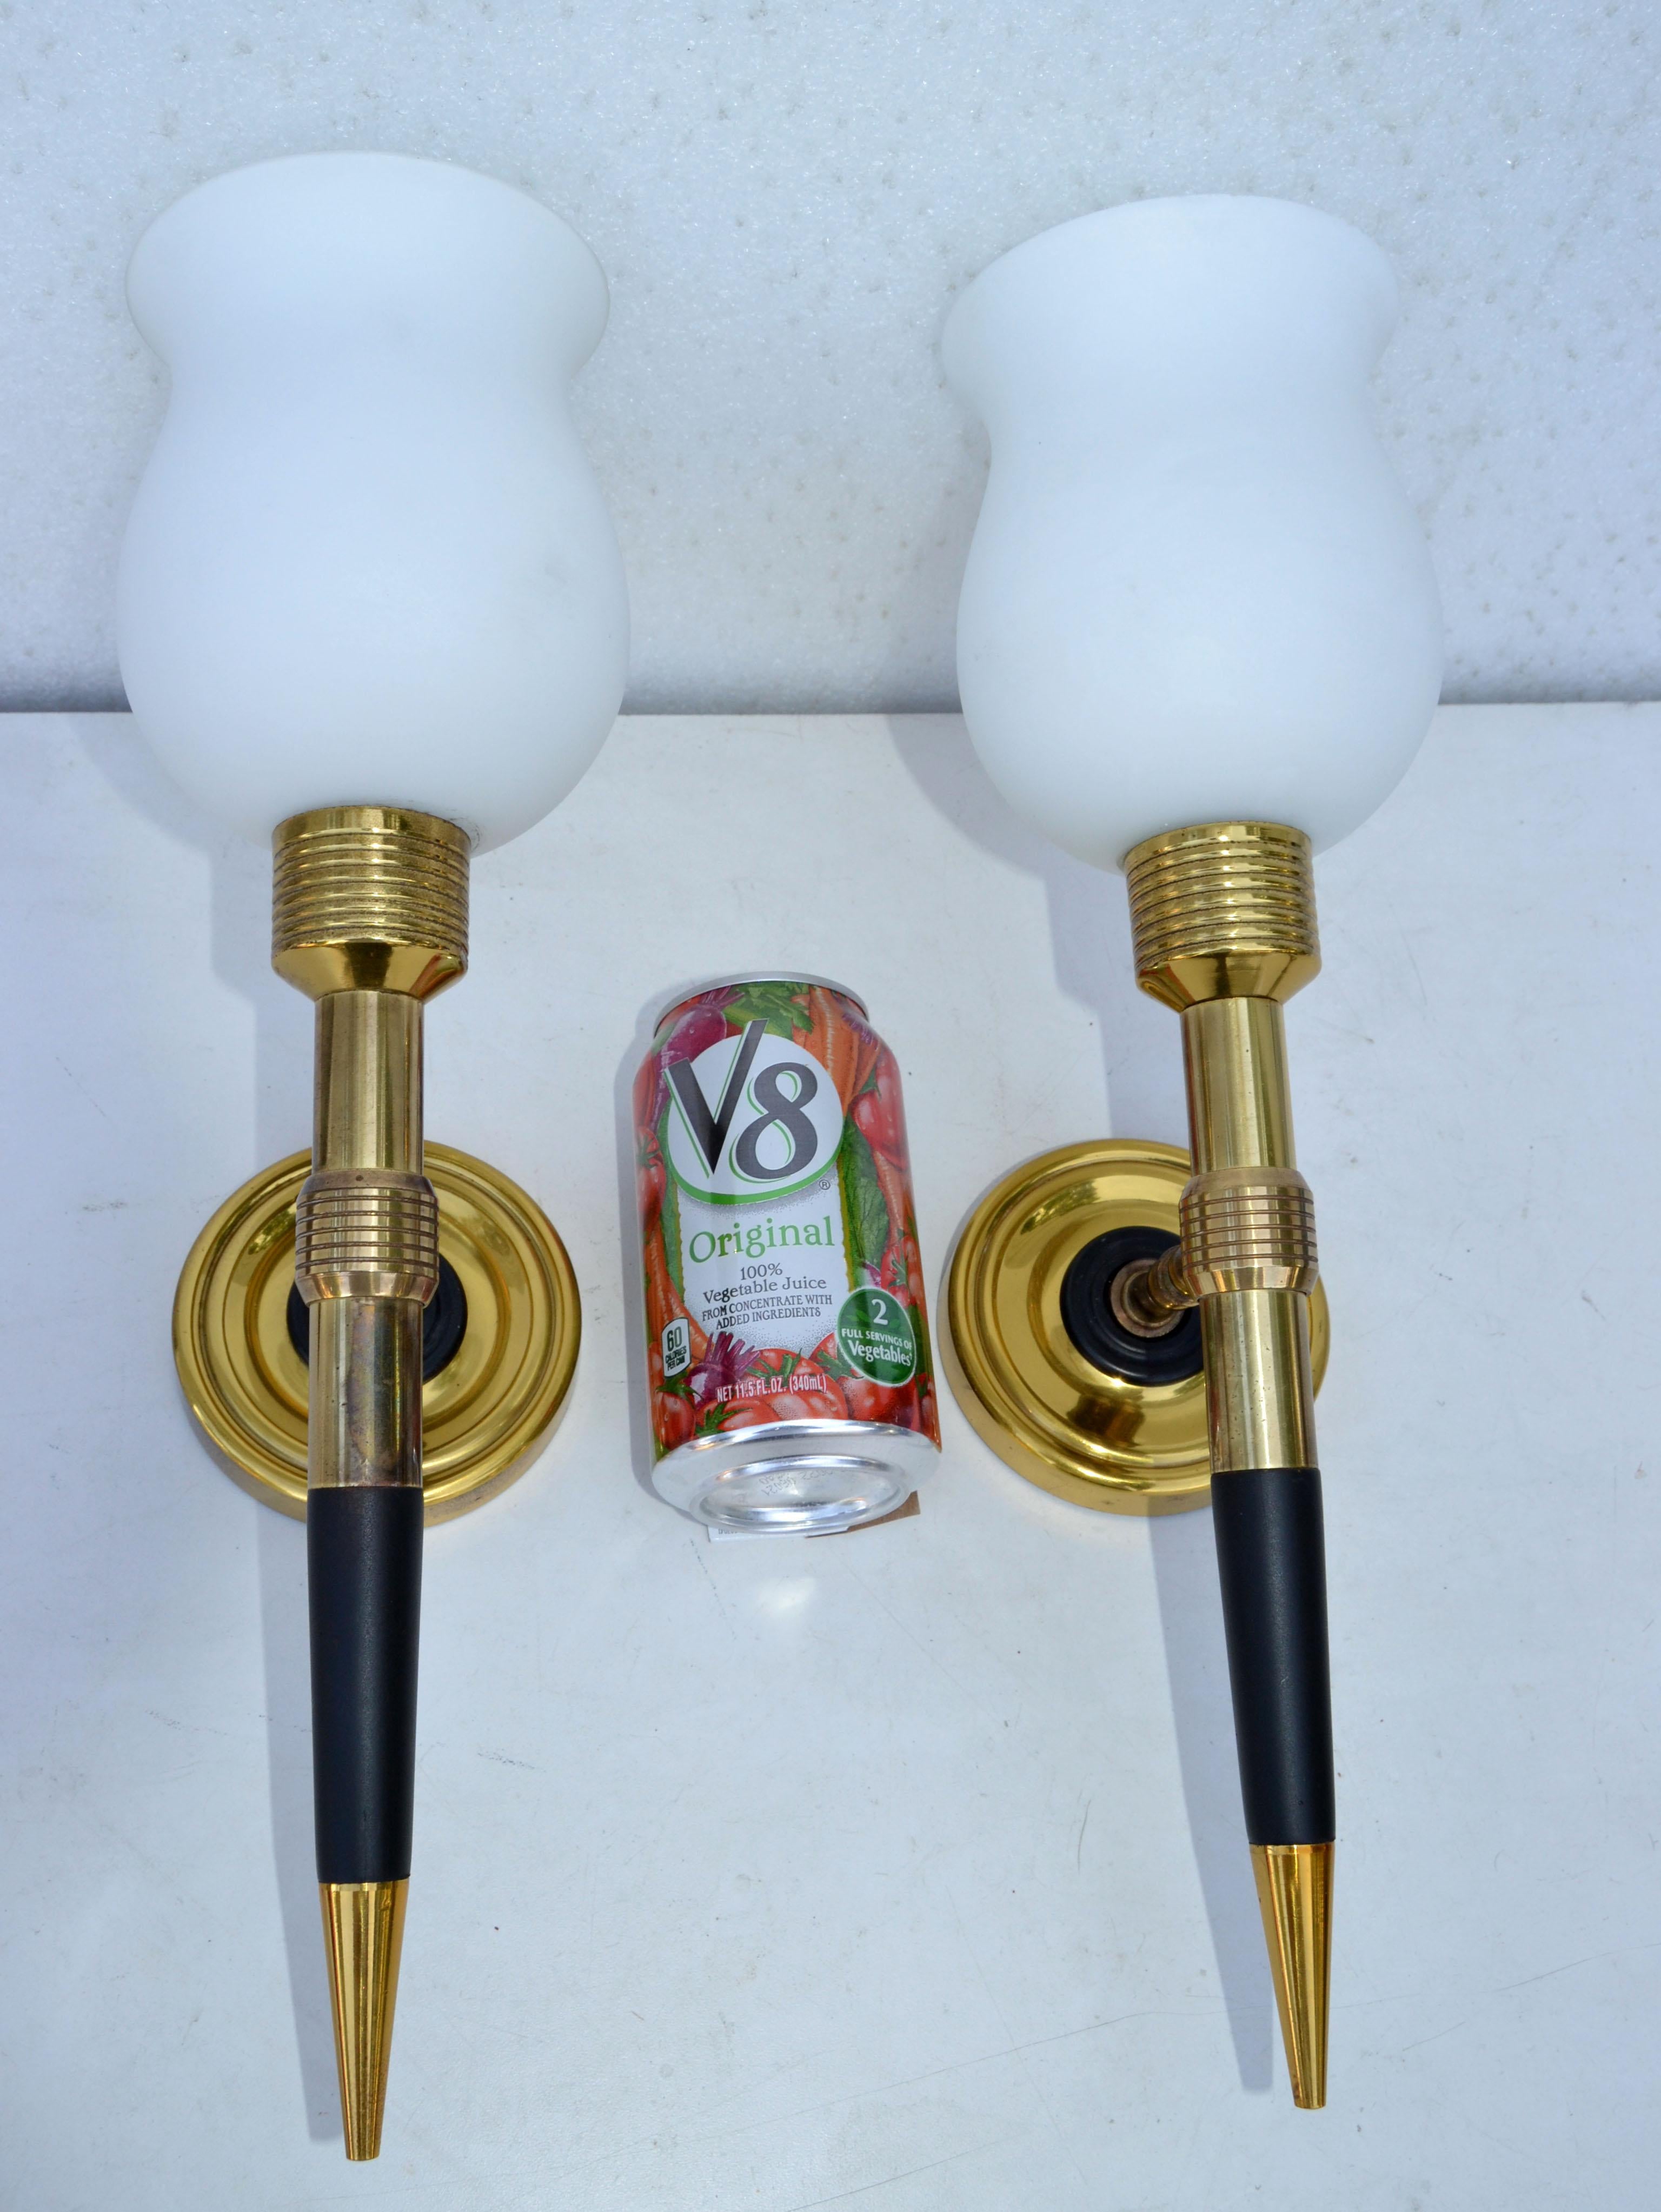 Maison Lancel Brass & Wood Sconces, Wall Lights Blown Opaline Shade France, Pair In Good Condition For Sale In Miami, FL